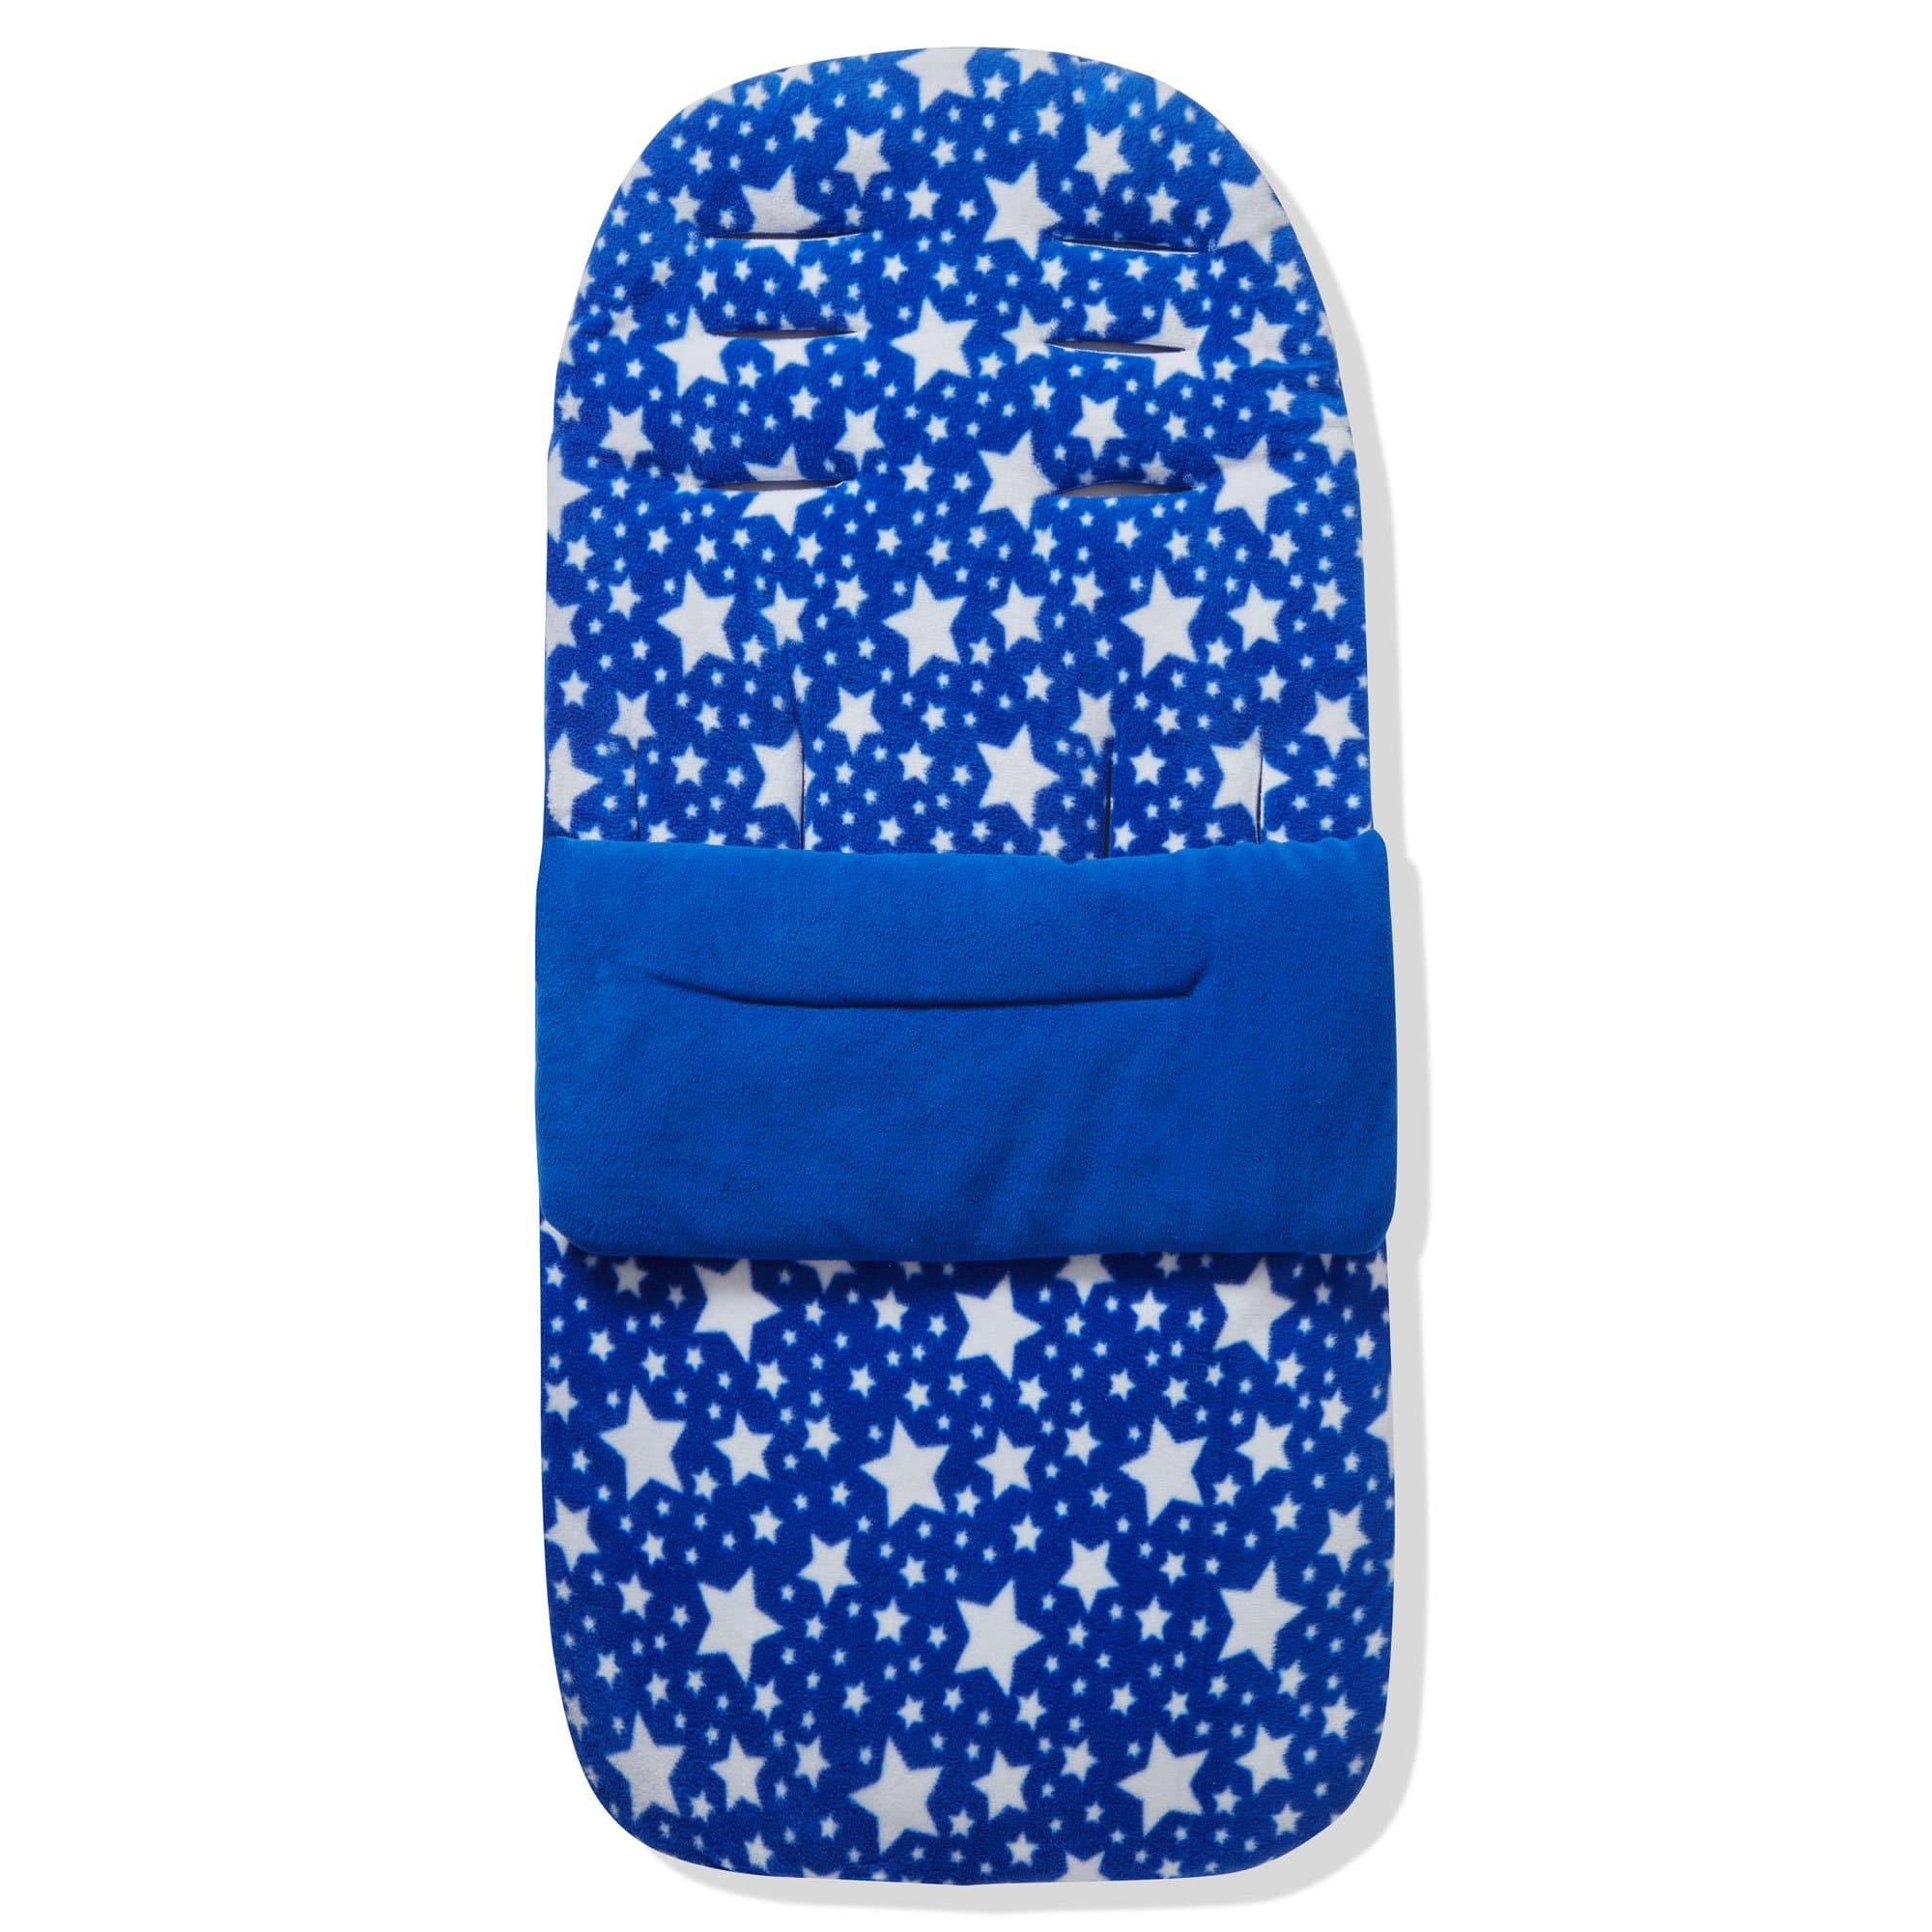 Universal Fleece Pushchair Footmuff / Cosy Toes - Fits All Pushchairs / Prams And Buggies Blue Star Fits All Models 